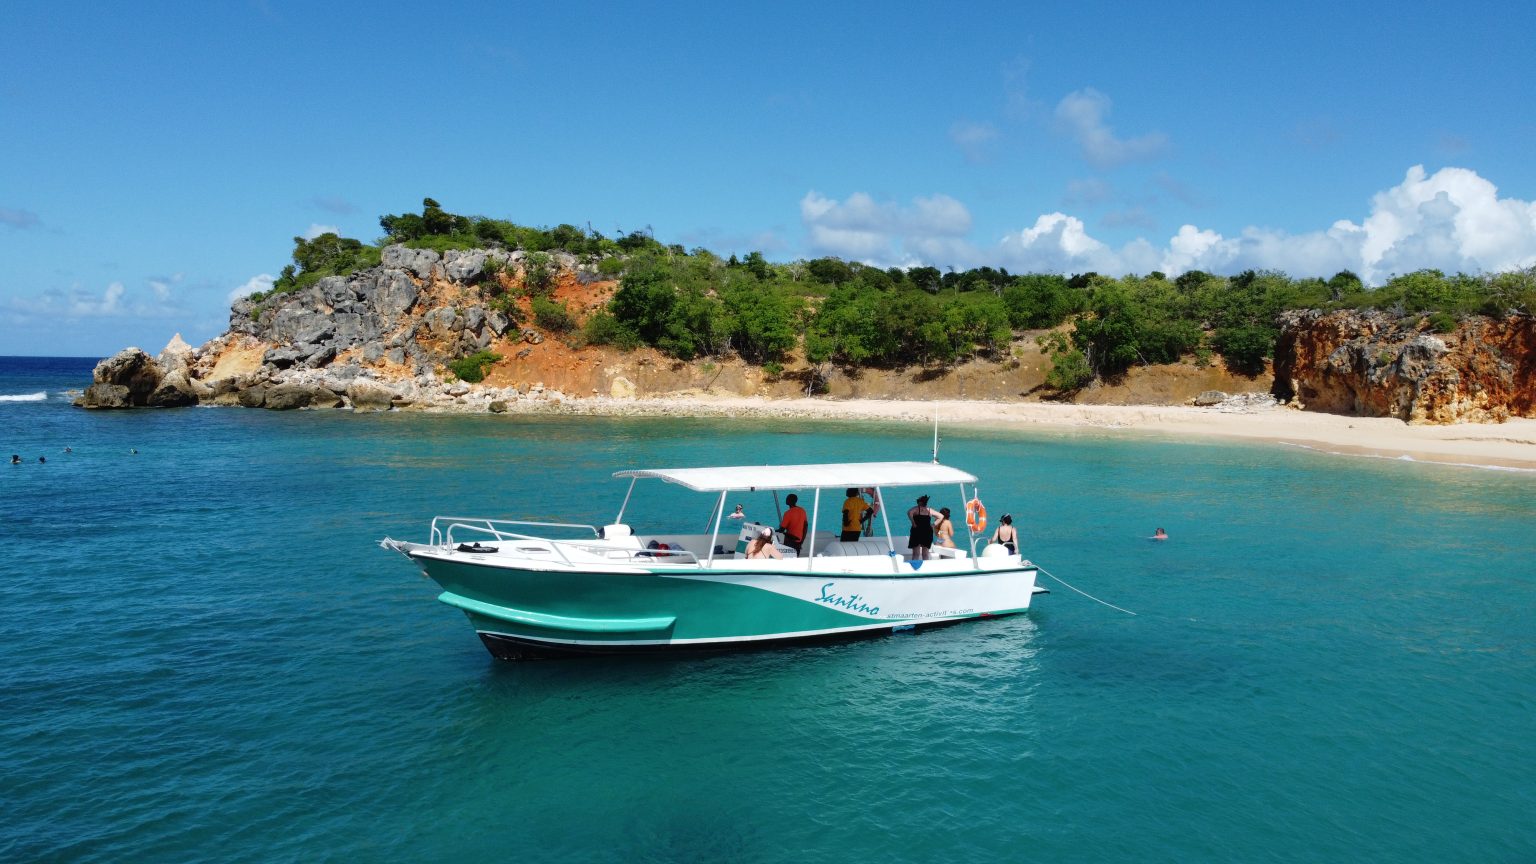 A picture of the Santino Round the Island Cruise offered by Aqua Mania Adventures, St maarten